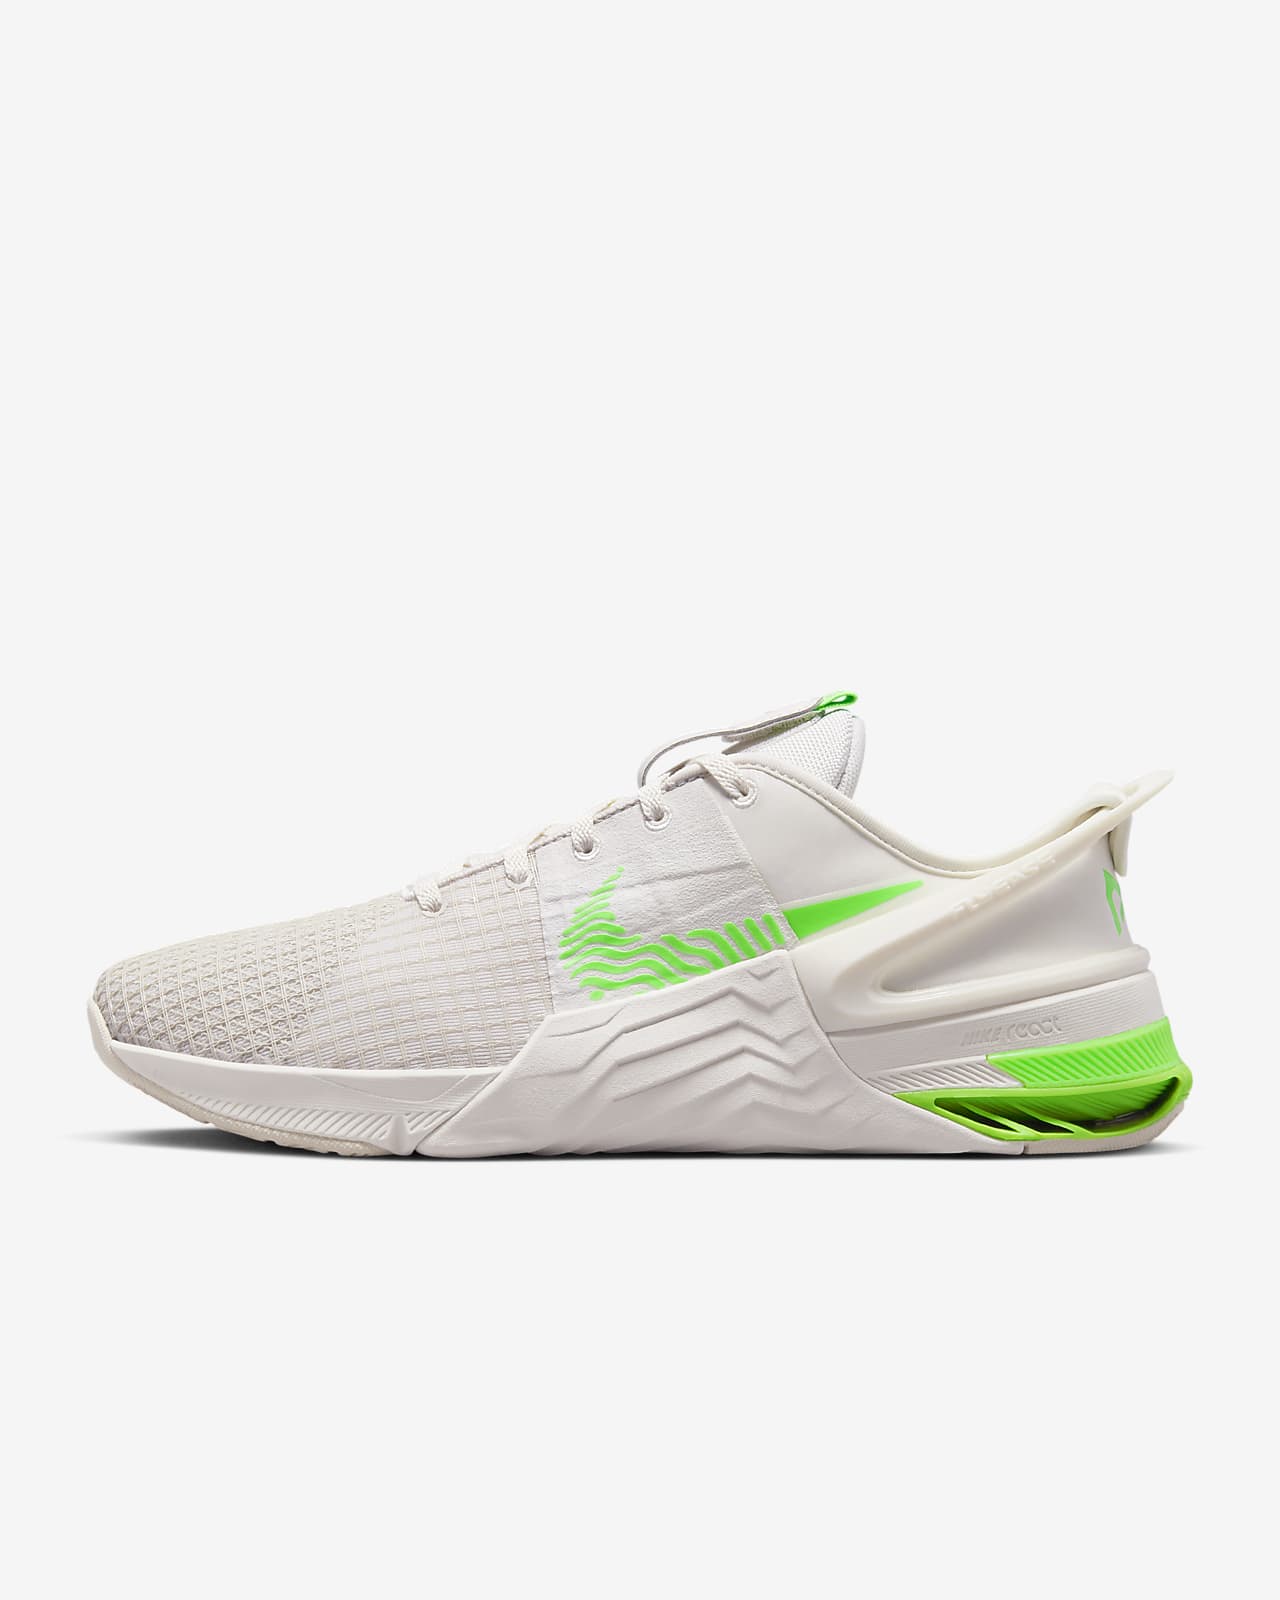 8 FlyEase Easy On/Off Training Shoes. LU